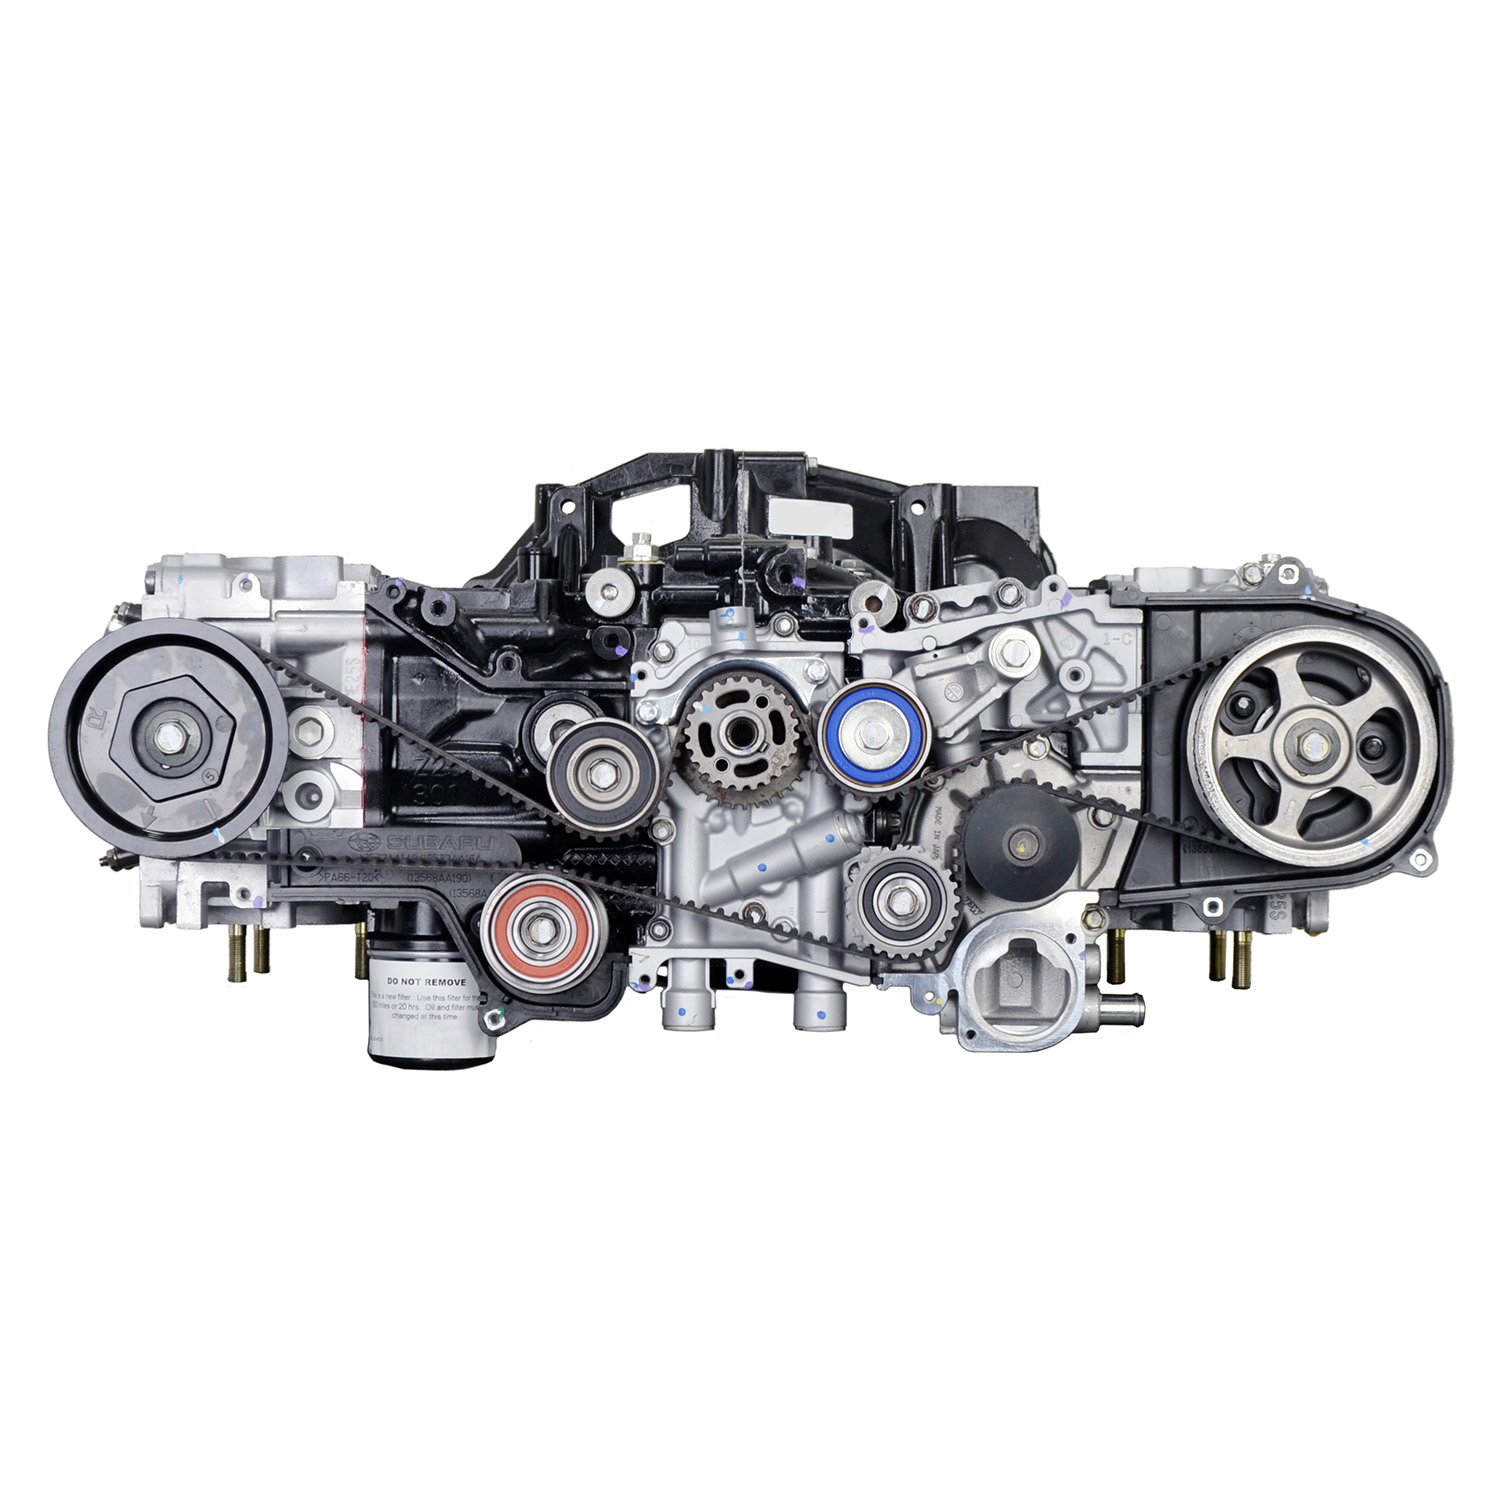 713H Remanufactured Crate Engine for 2010-2012 Subaru Legacy & Outback with 2.5L H4 EJ253